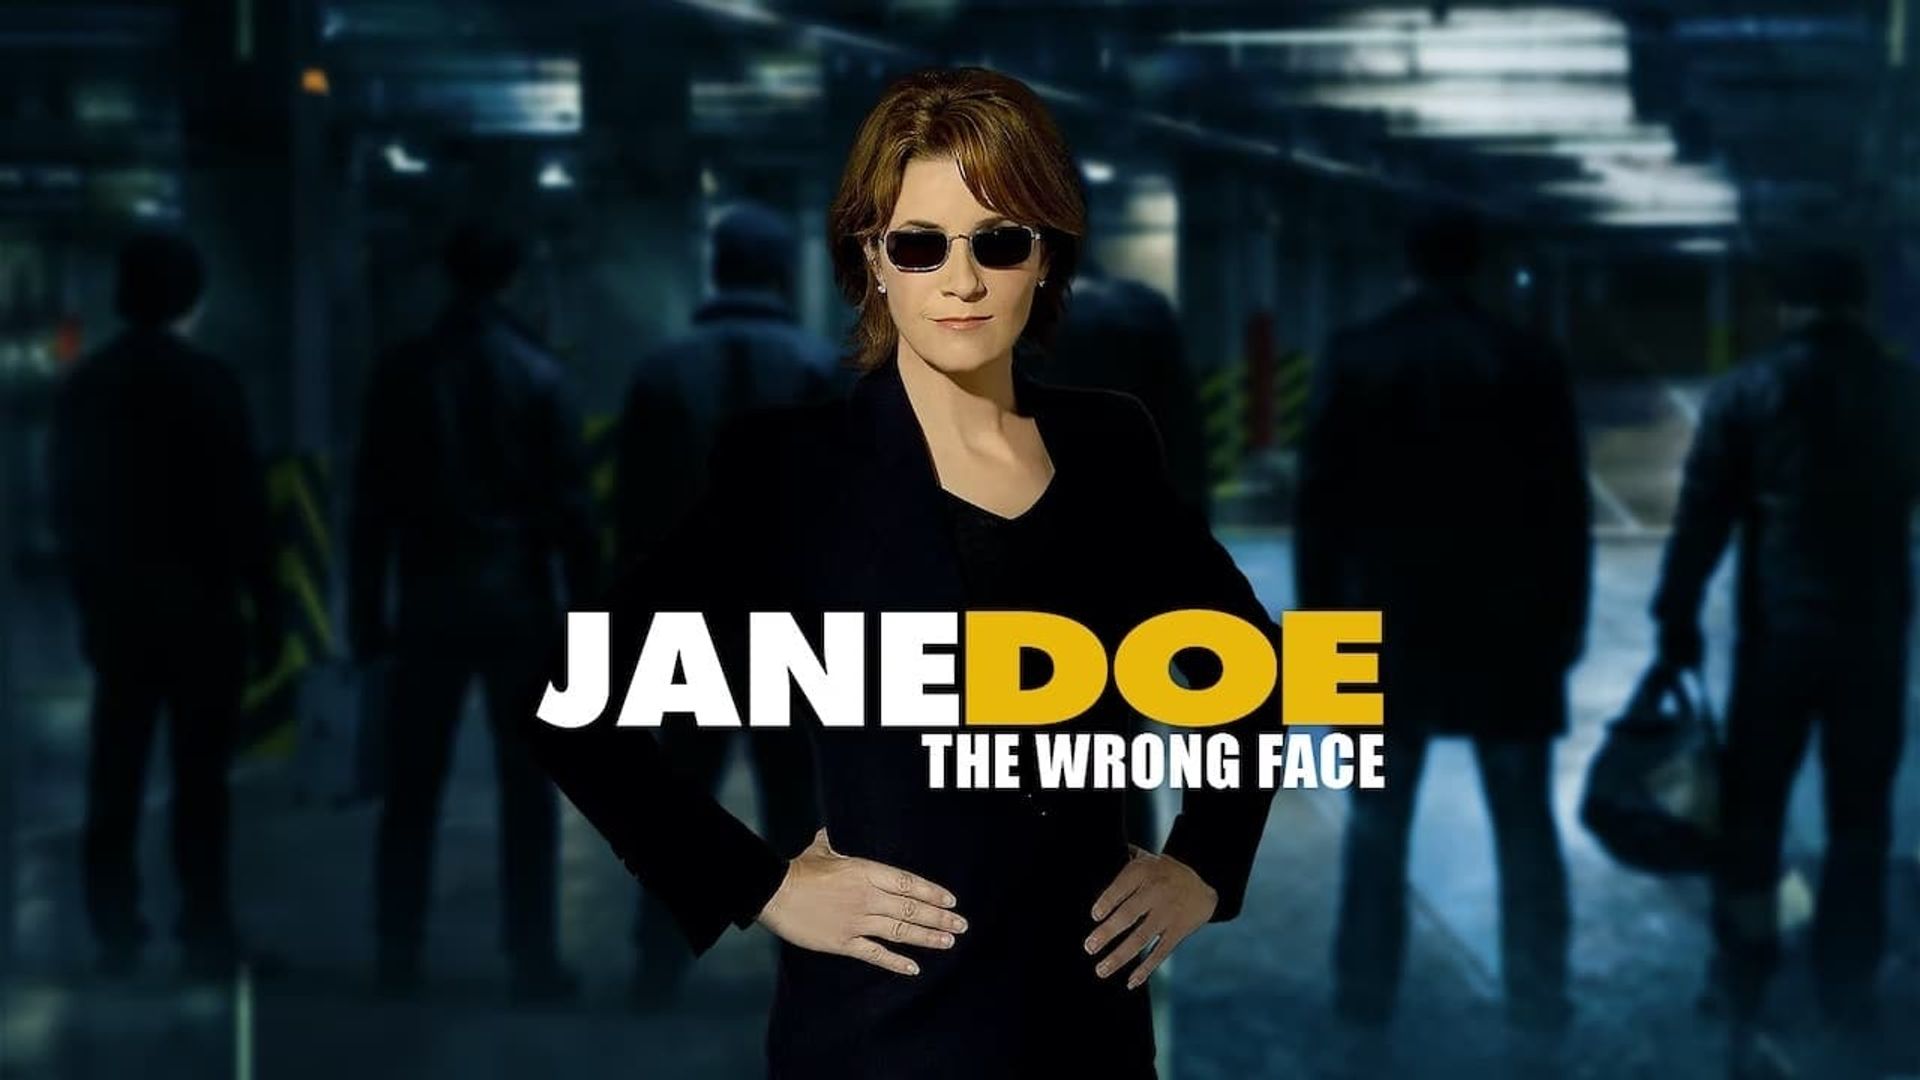 Jane Doe: The Wrong Face background